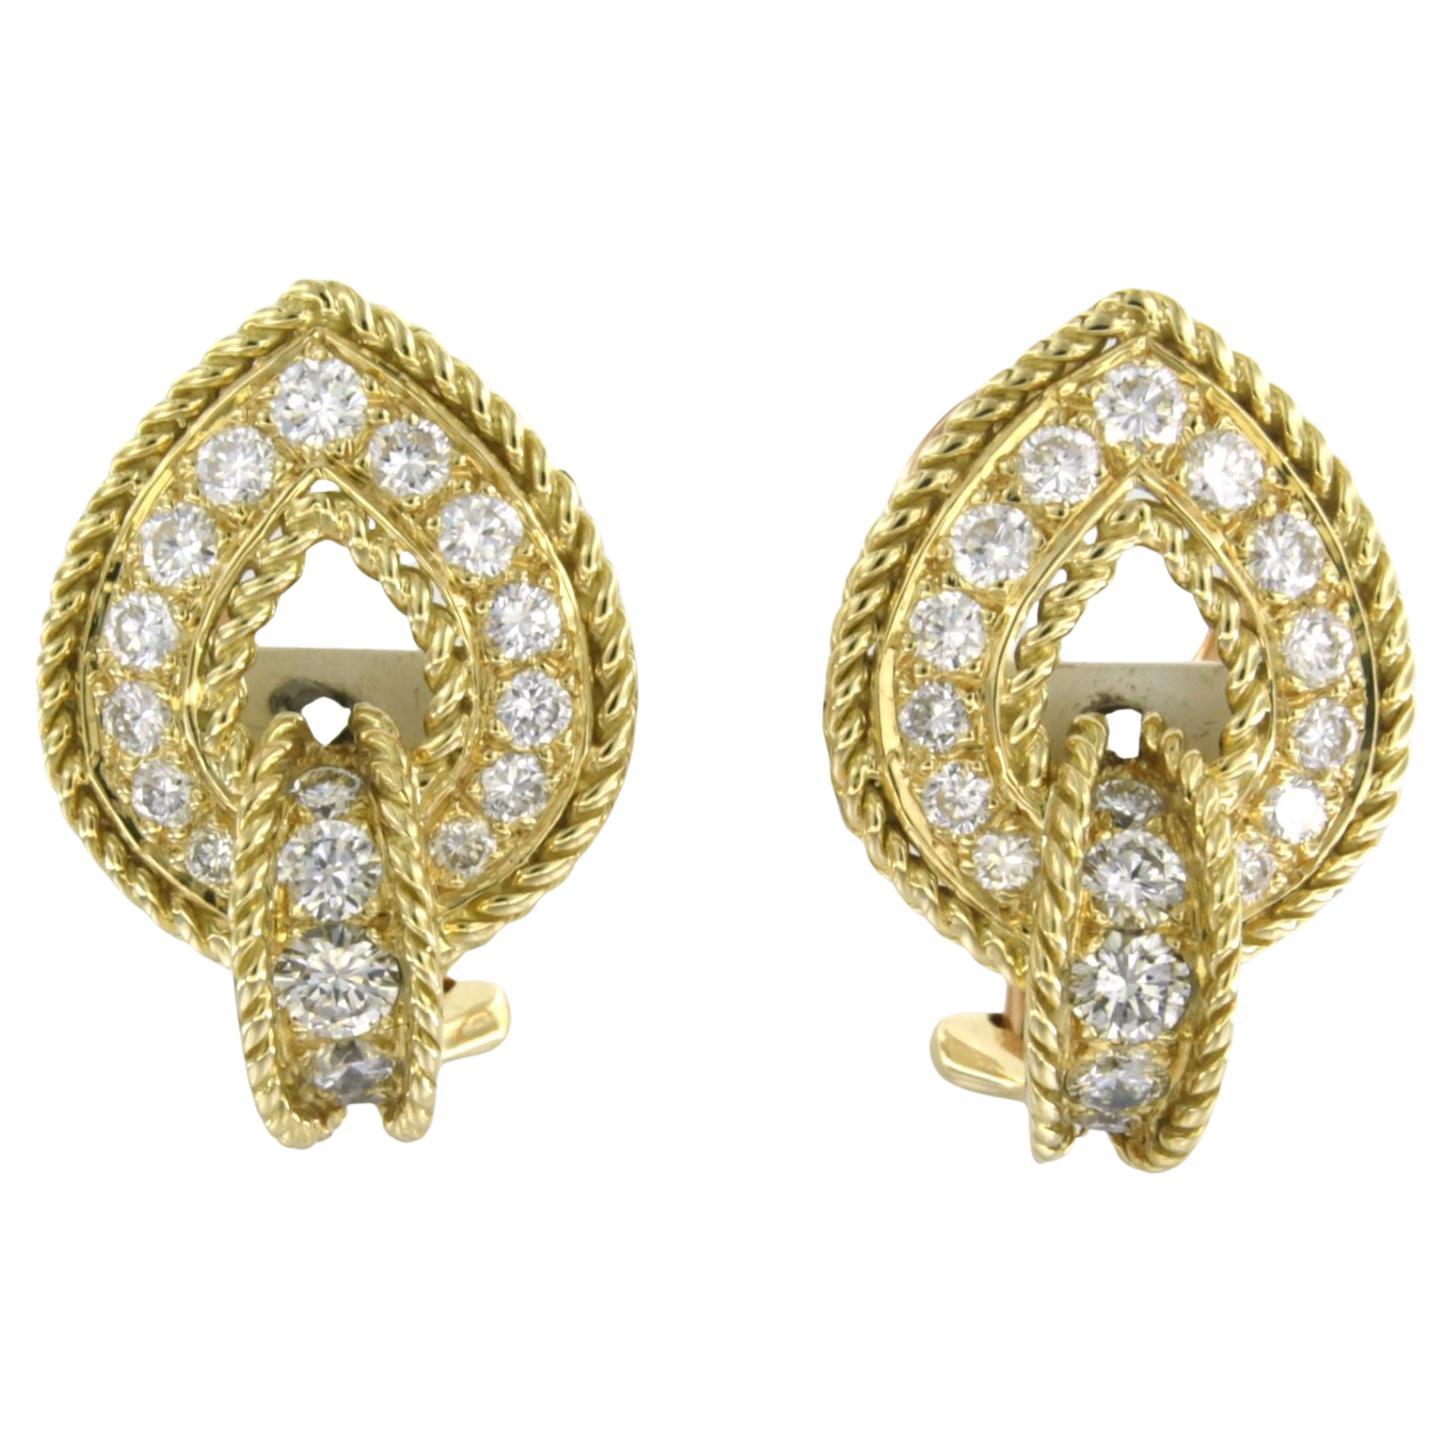 Earrings clip-on set with diamonds up to 2.00ct. 18k yellow gold